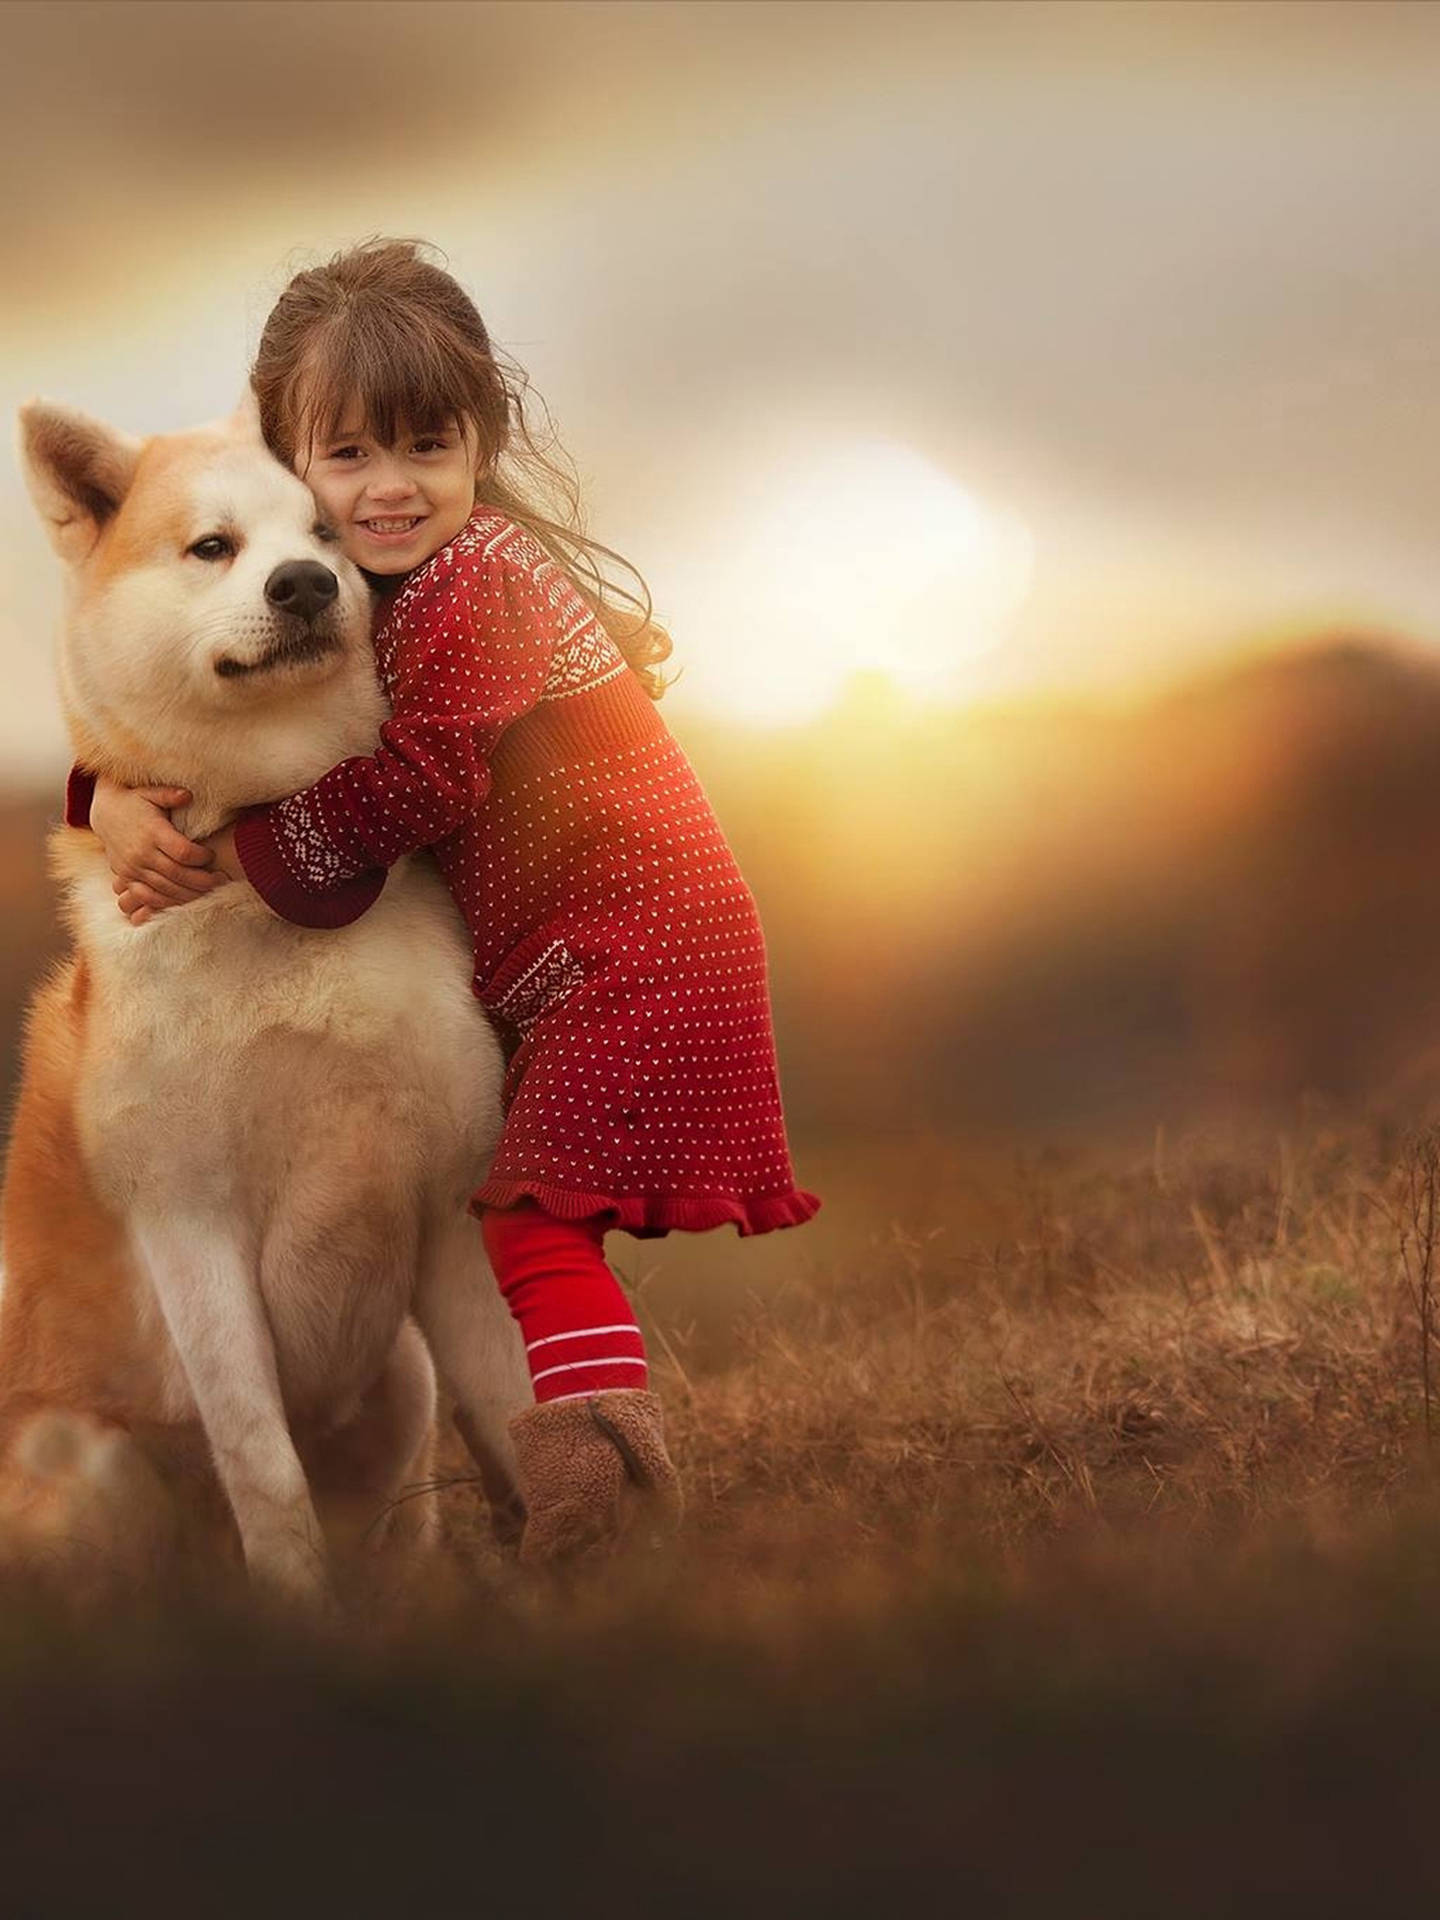 Beautiful Day Dog And Girl Wallpaper